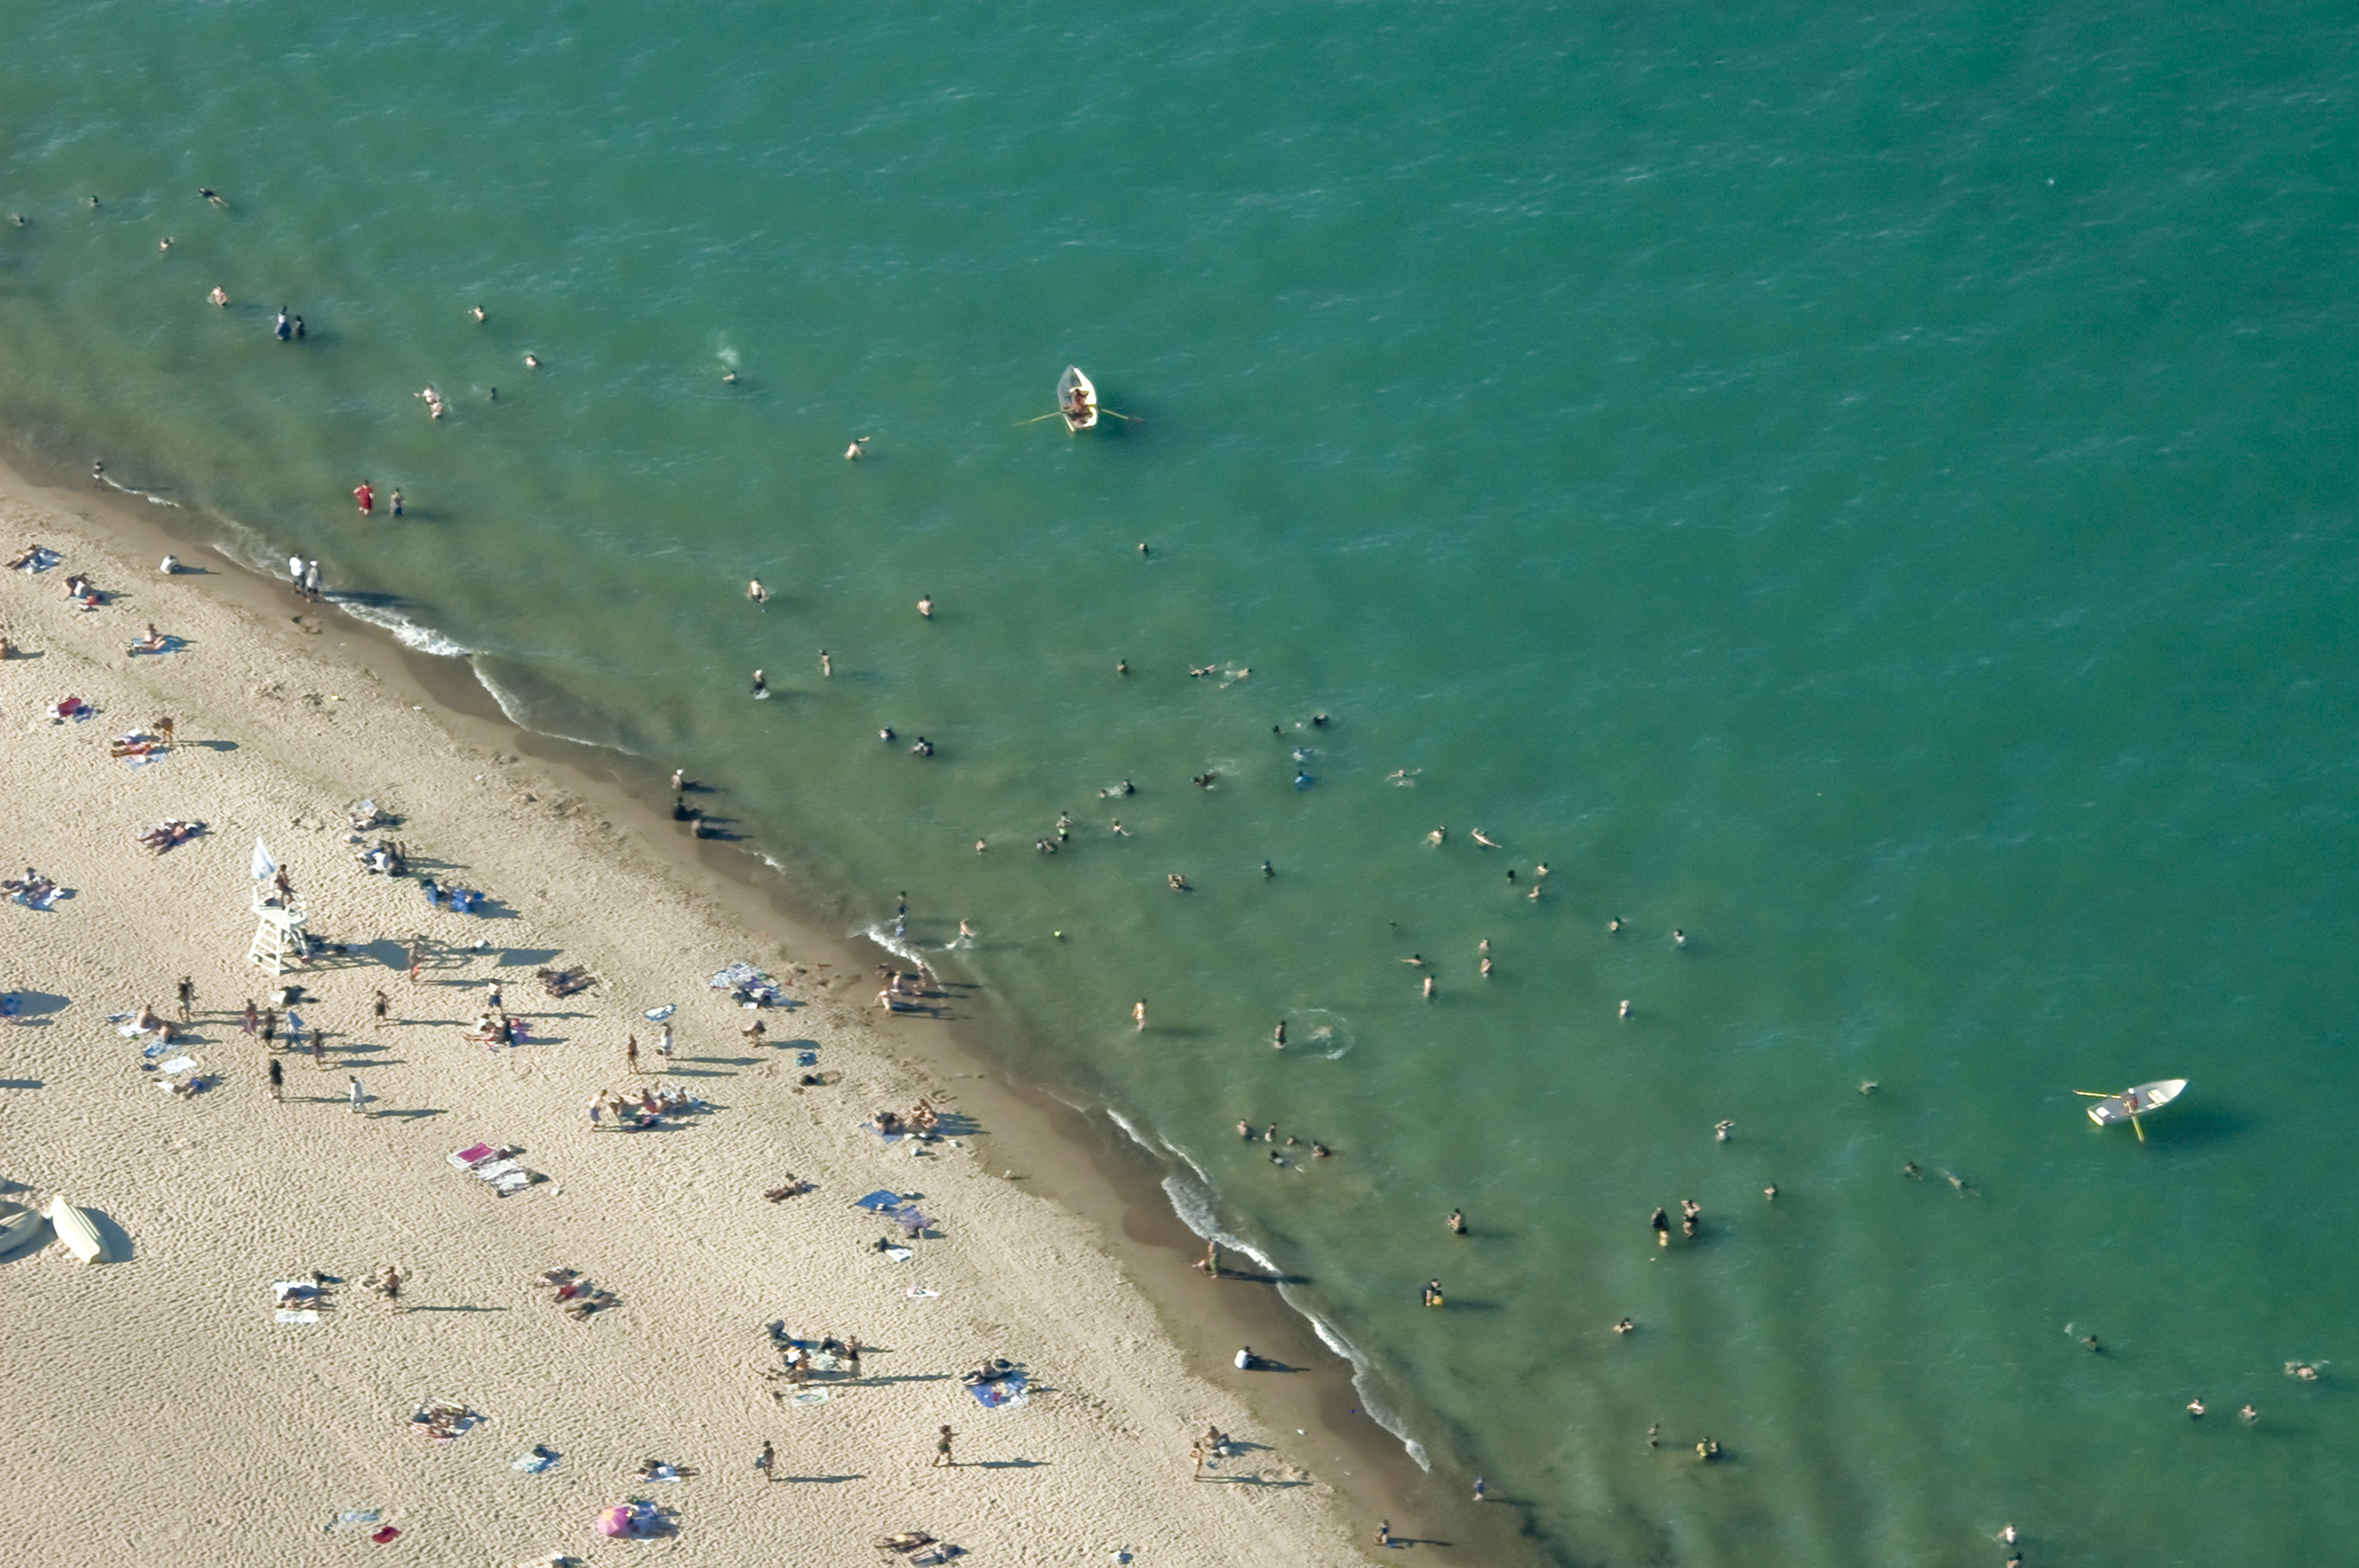 An aerial view of a beach with sand and the ocean. There are beachgoers in both the sand and ocean.